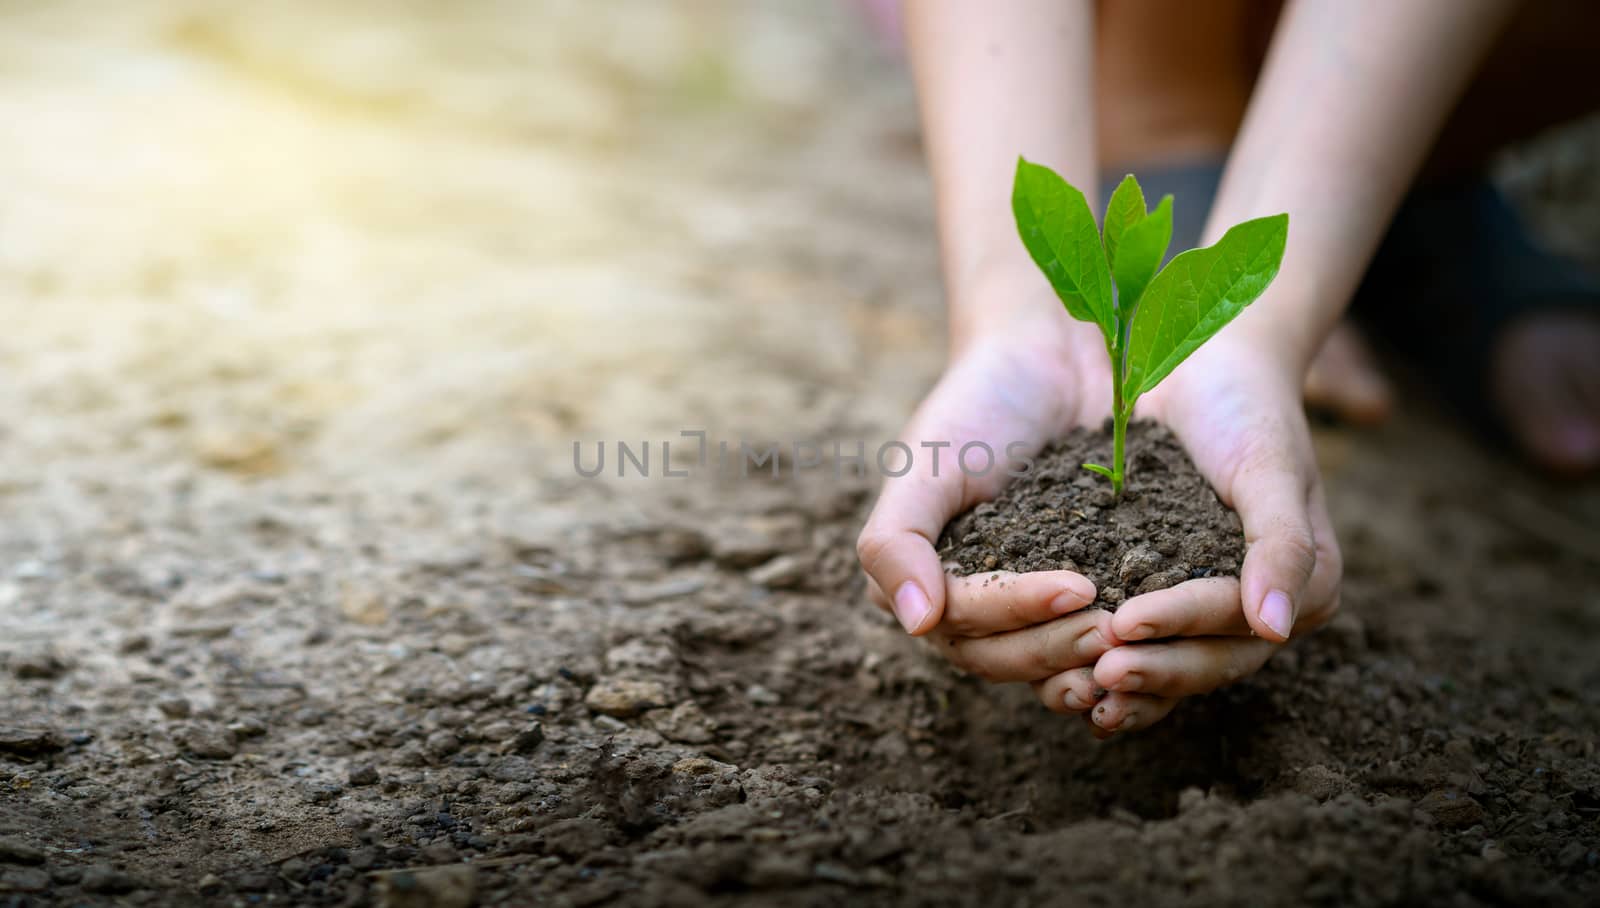 environment Earth Day In the hands of trees growing seedlings. Bokeh green Background Female hand holding tree on nature field grass Forest conservation concept